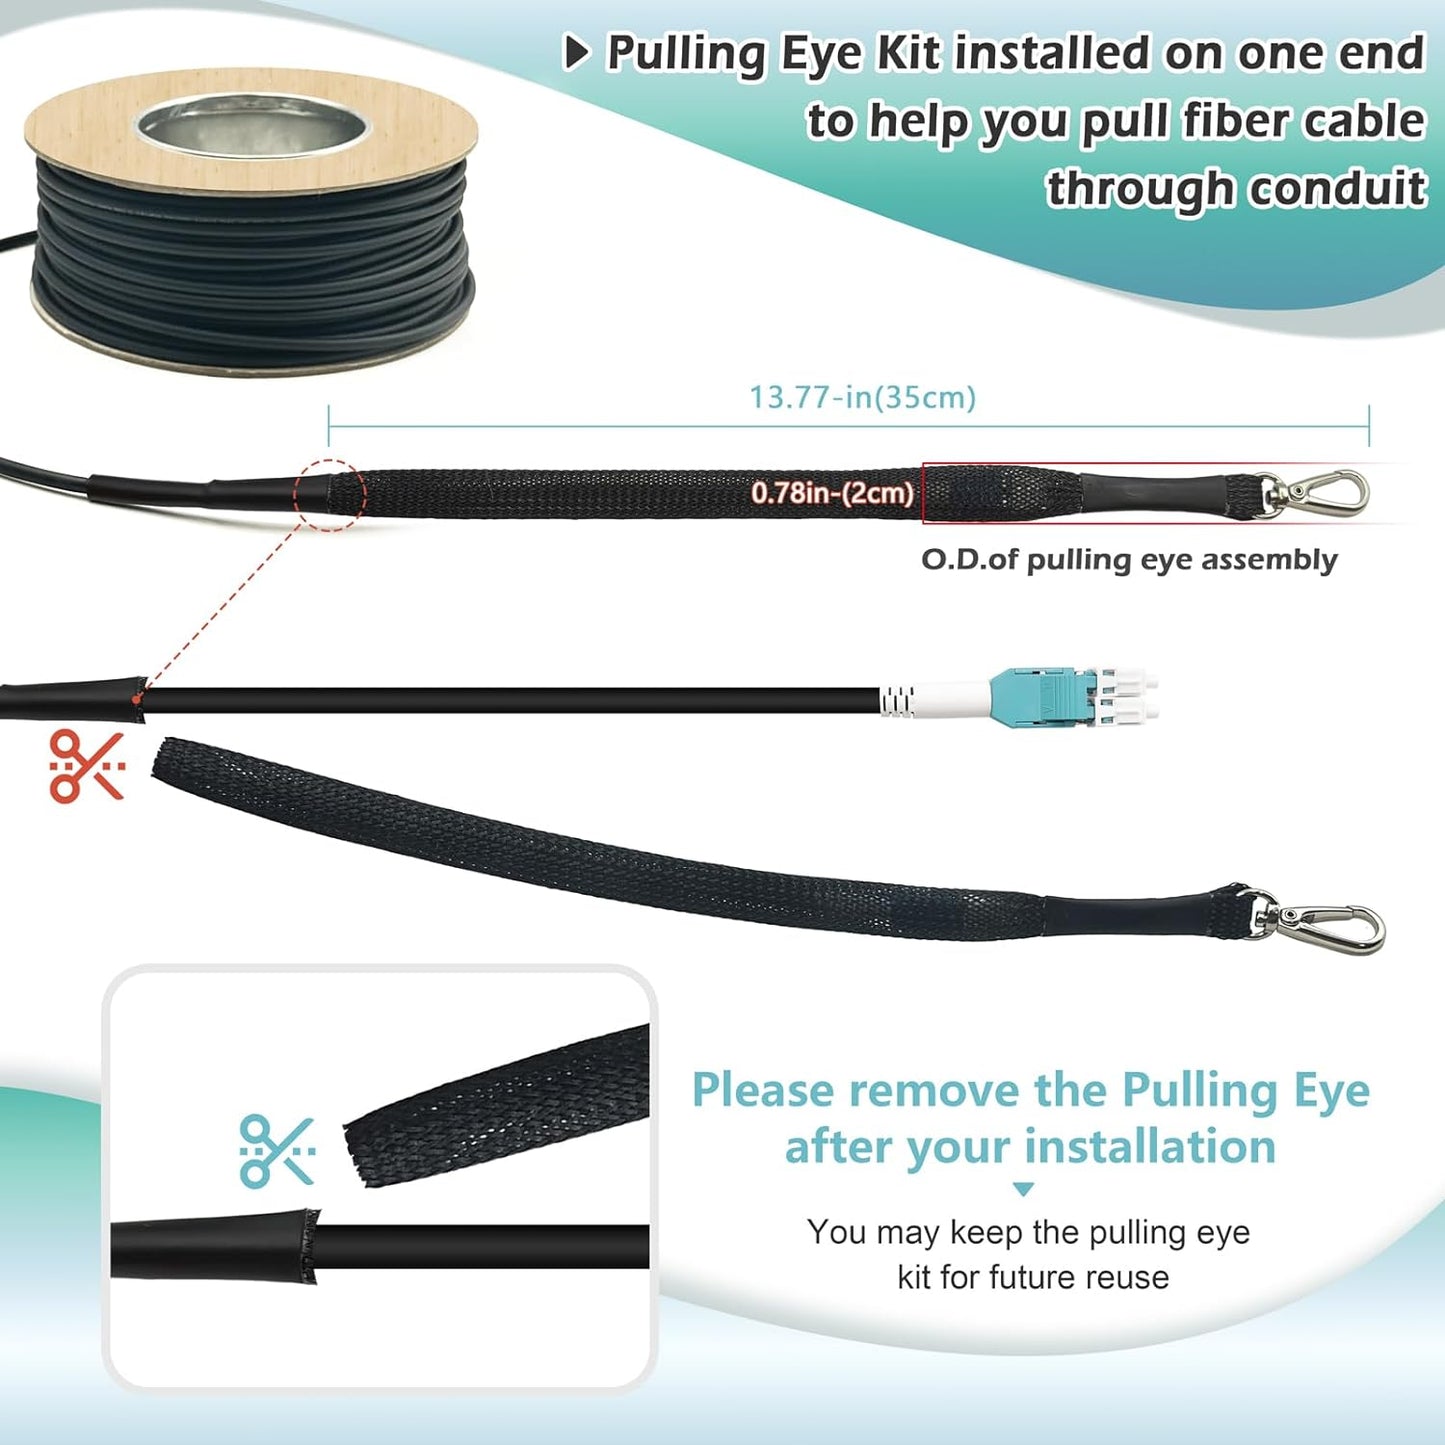 330ft/100m OD-5mm Industrial TPU OM3 Fiber LC to LC Outdoor Armored Fiber Patch Cable, Duplex Multimode Fiber Optic Cable, 40Gb 10Gb, 50/125, Uniboot LC-LC with Pulling Eye Kit Installed on one end